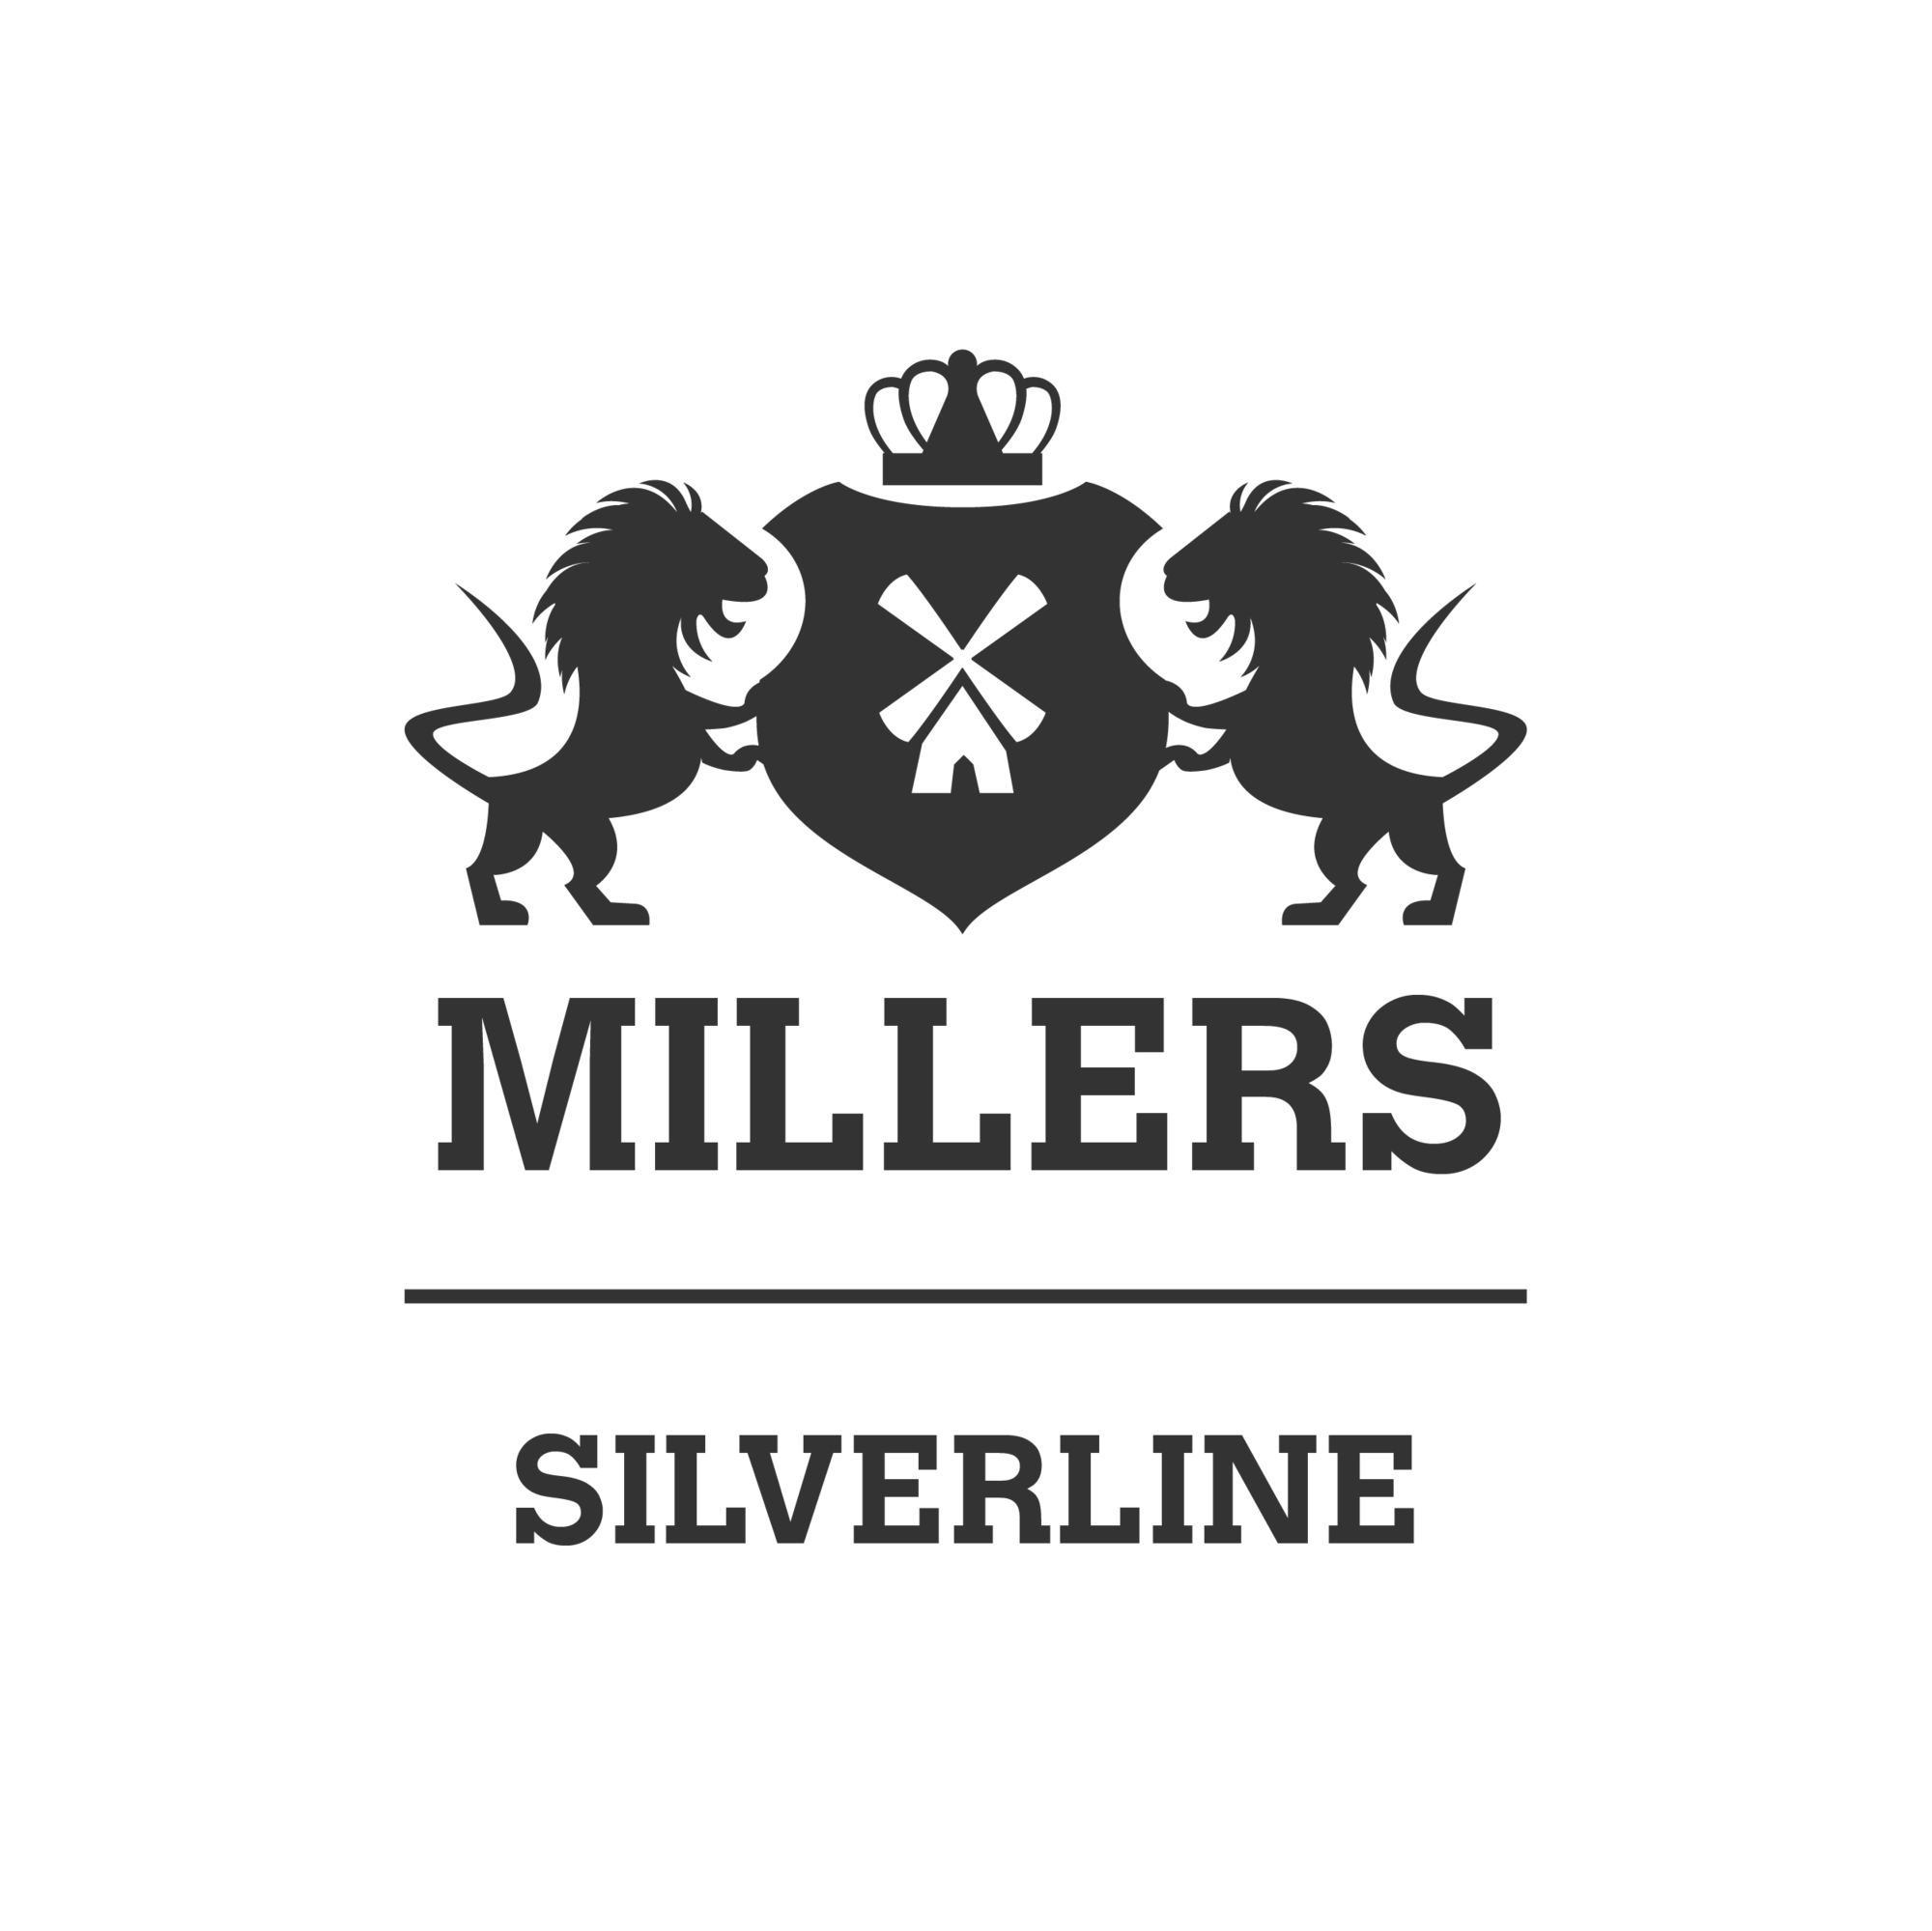 Red with Silver Line Logo - Millers Juice Silverline